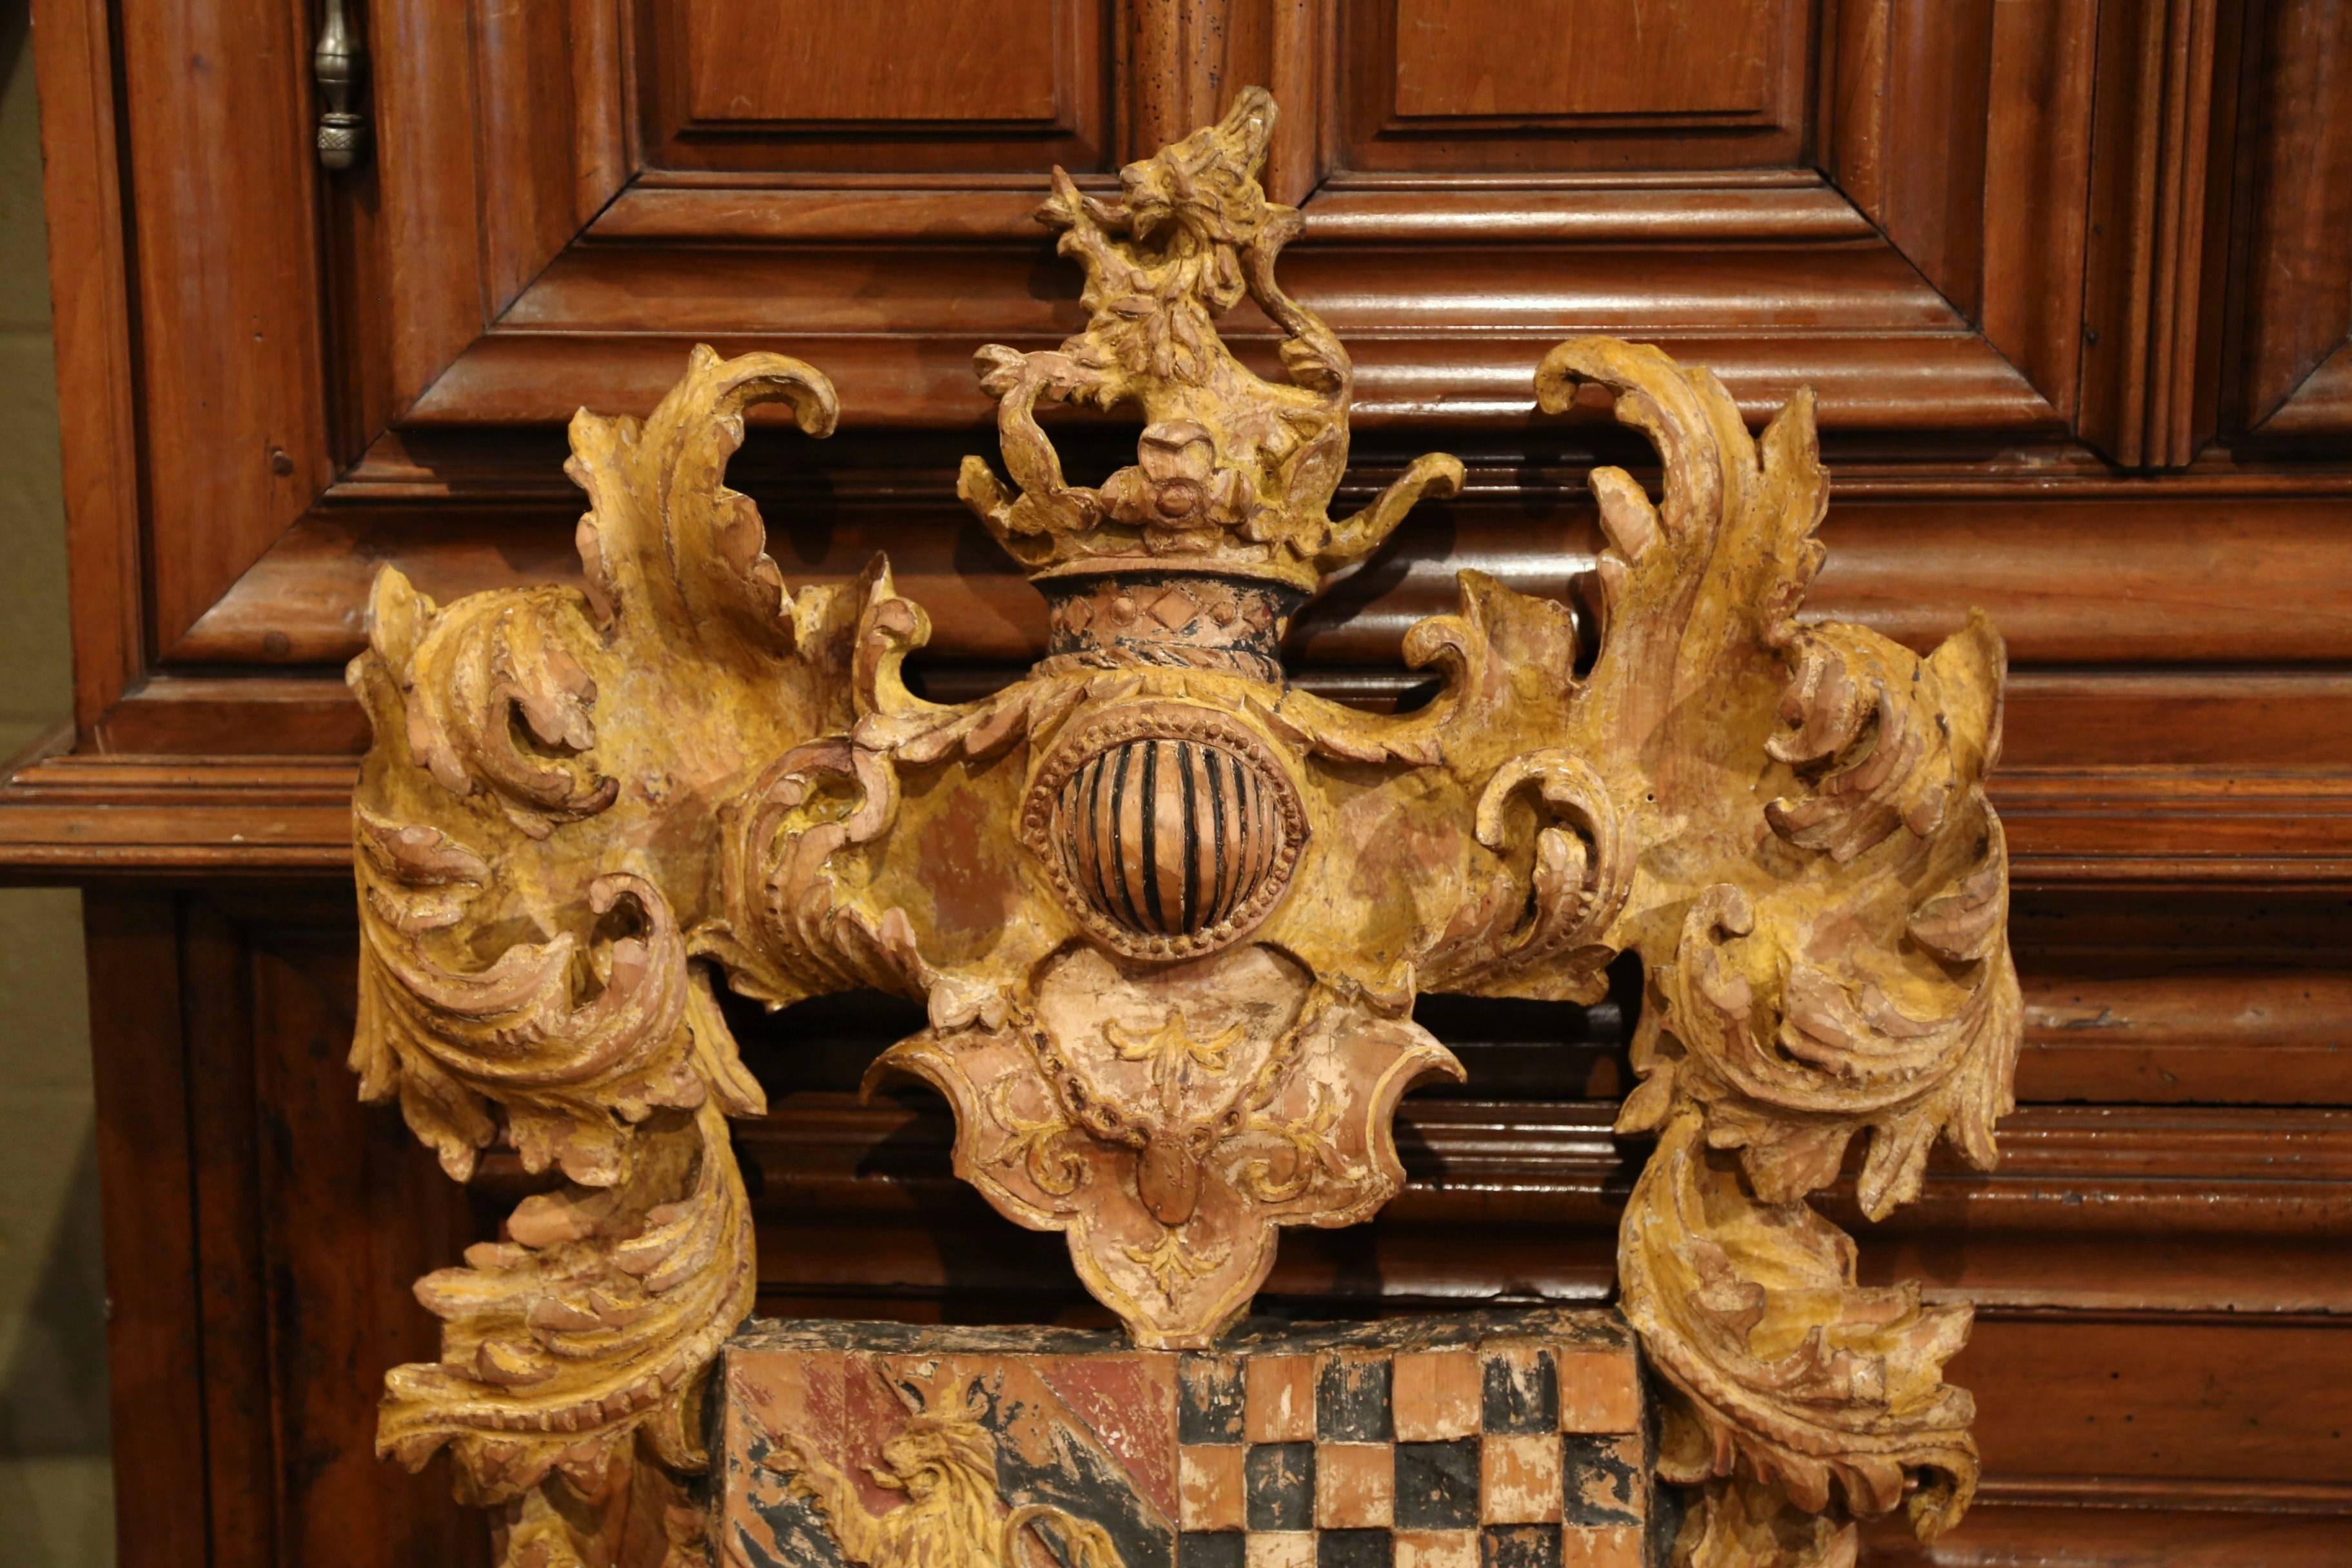 Embellish your wall with this large antique, medieval crest. Hand-carved in France, circa 1920, the Rococo, painted shield has a crown at the pediment with helmet from a suit of armor, decorative foliage motifs on both sides. The centre part